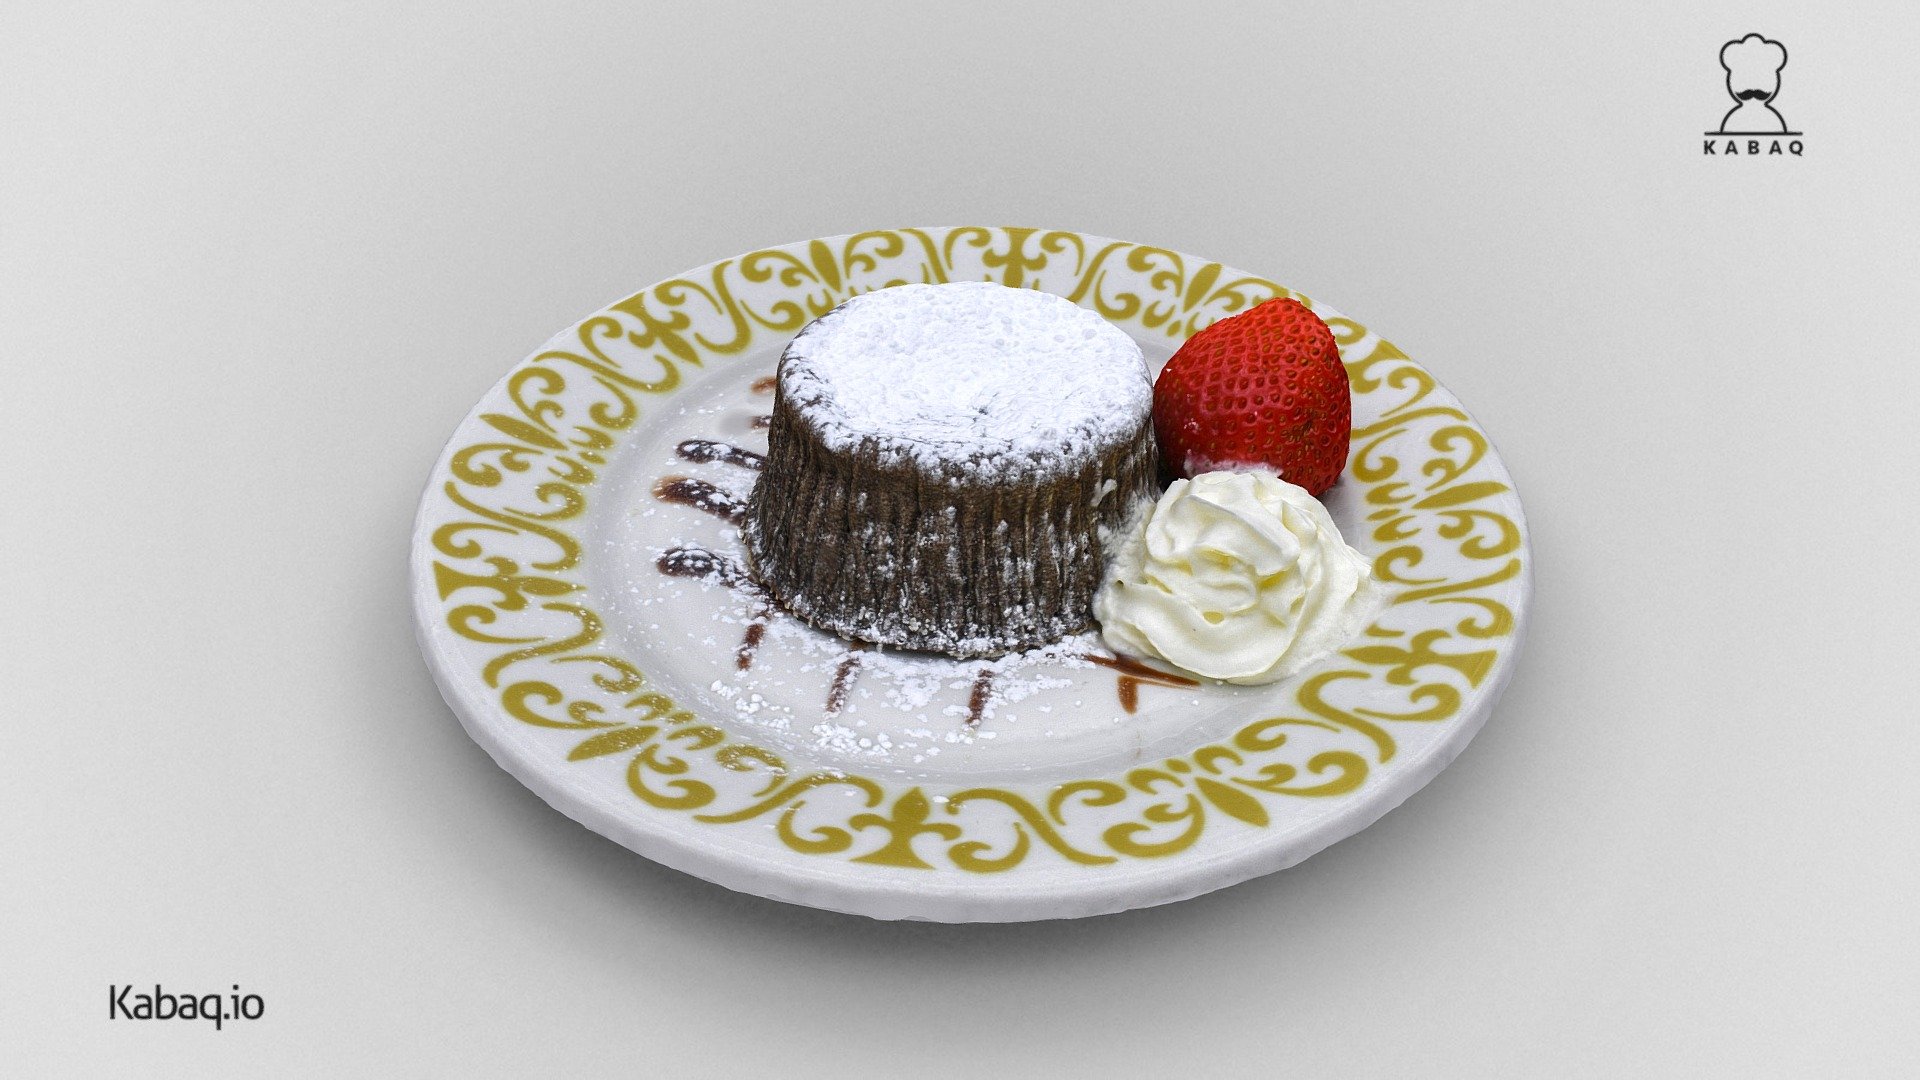 Vino Laventino - Coffee Chocolate Lava Cake - 3D model by QReal Lifelike 3D (@kabaq) 3d model